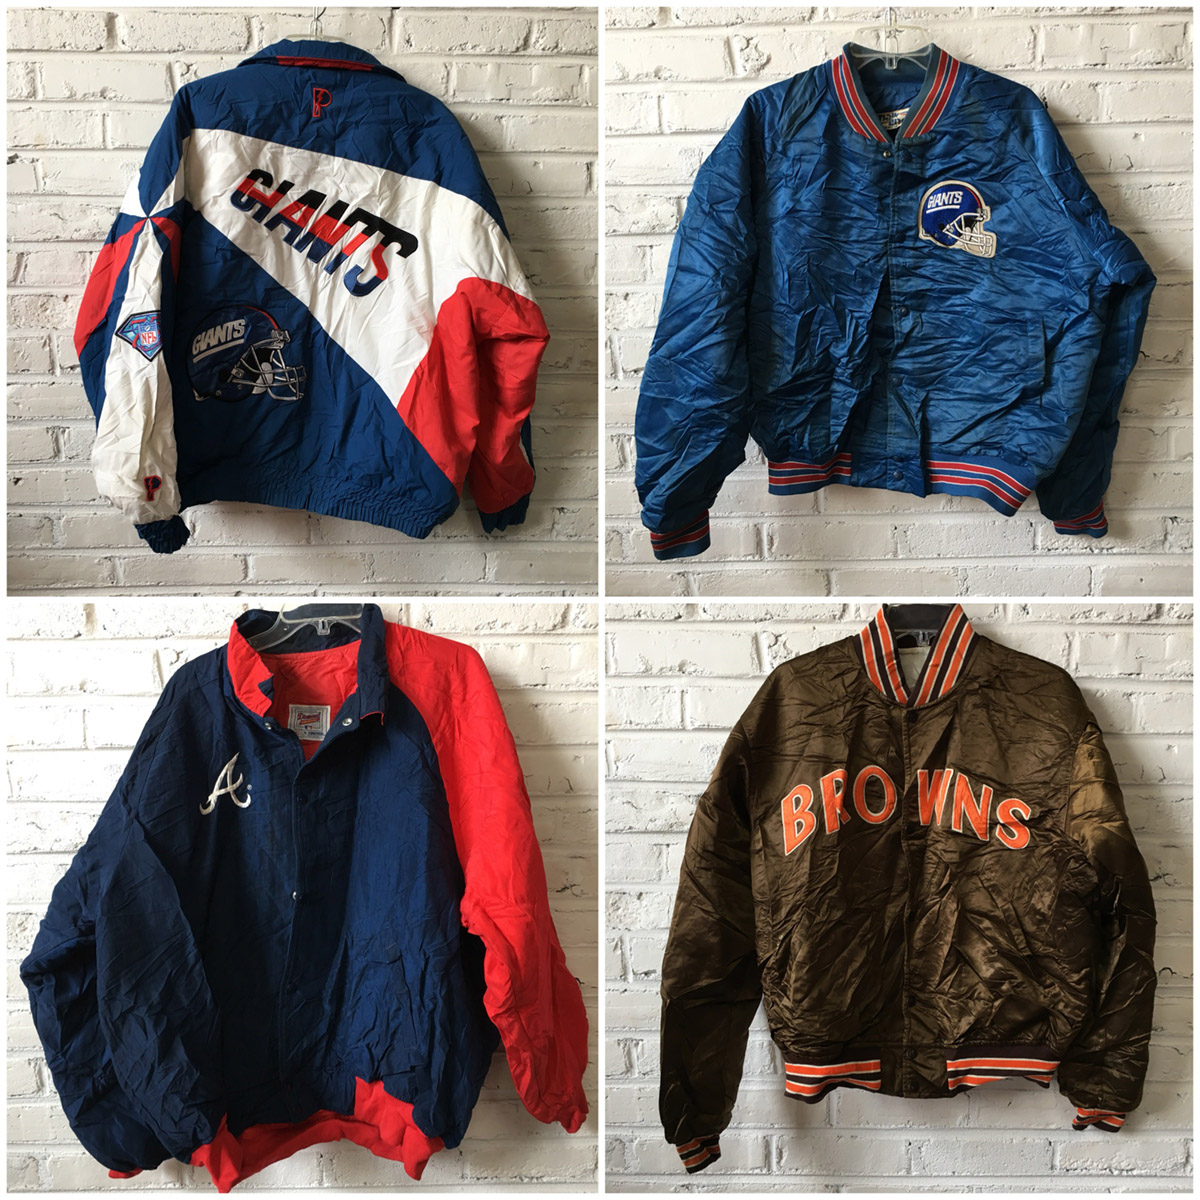 Pro Sports team Jackets-FOR SALE IN THE WAREHOUSE ONLY: Bulk